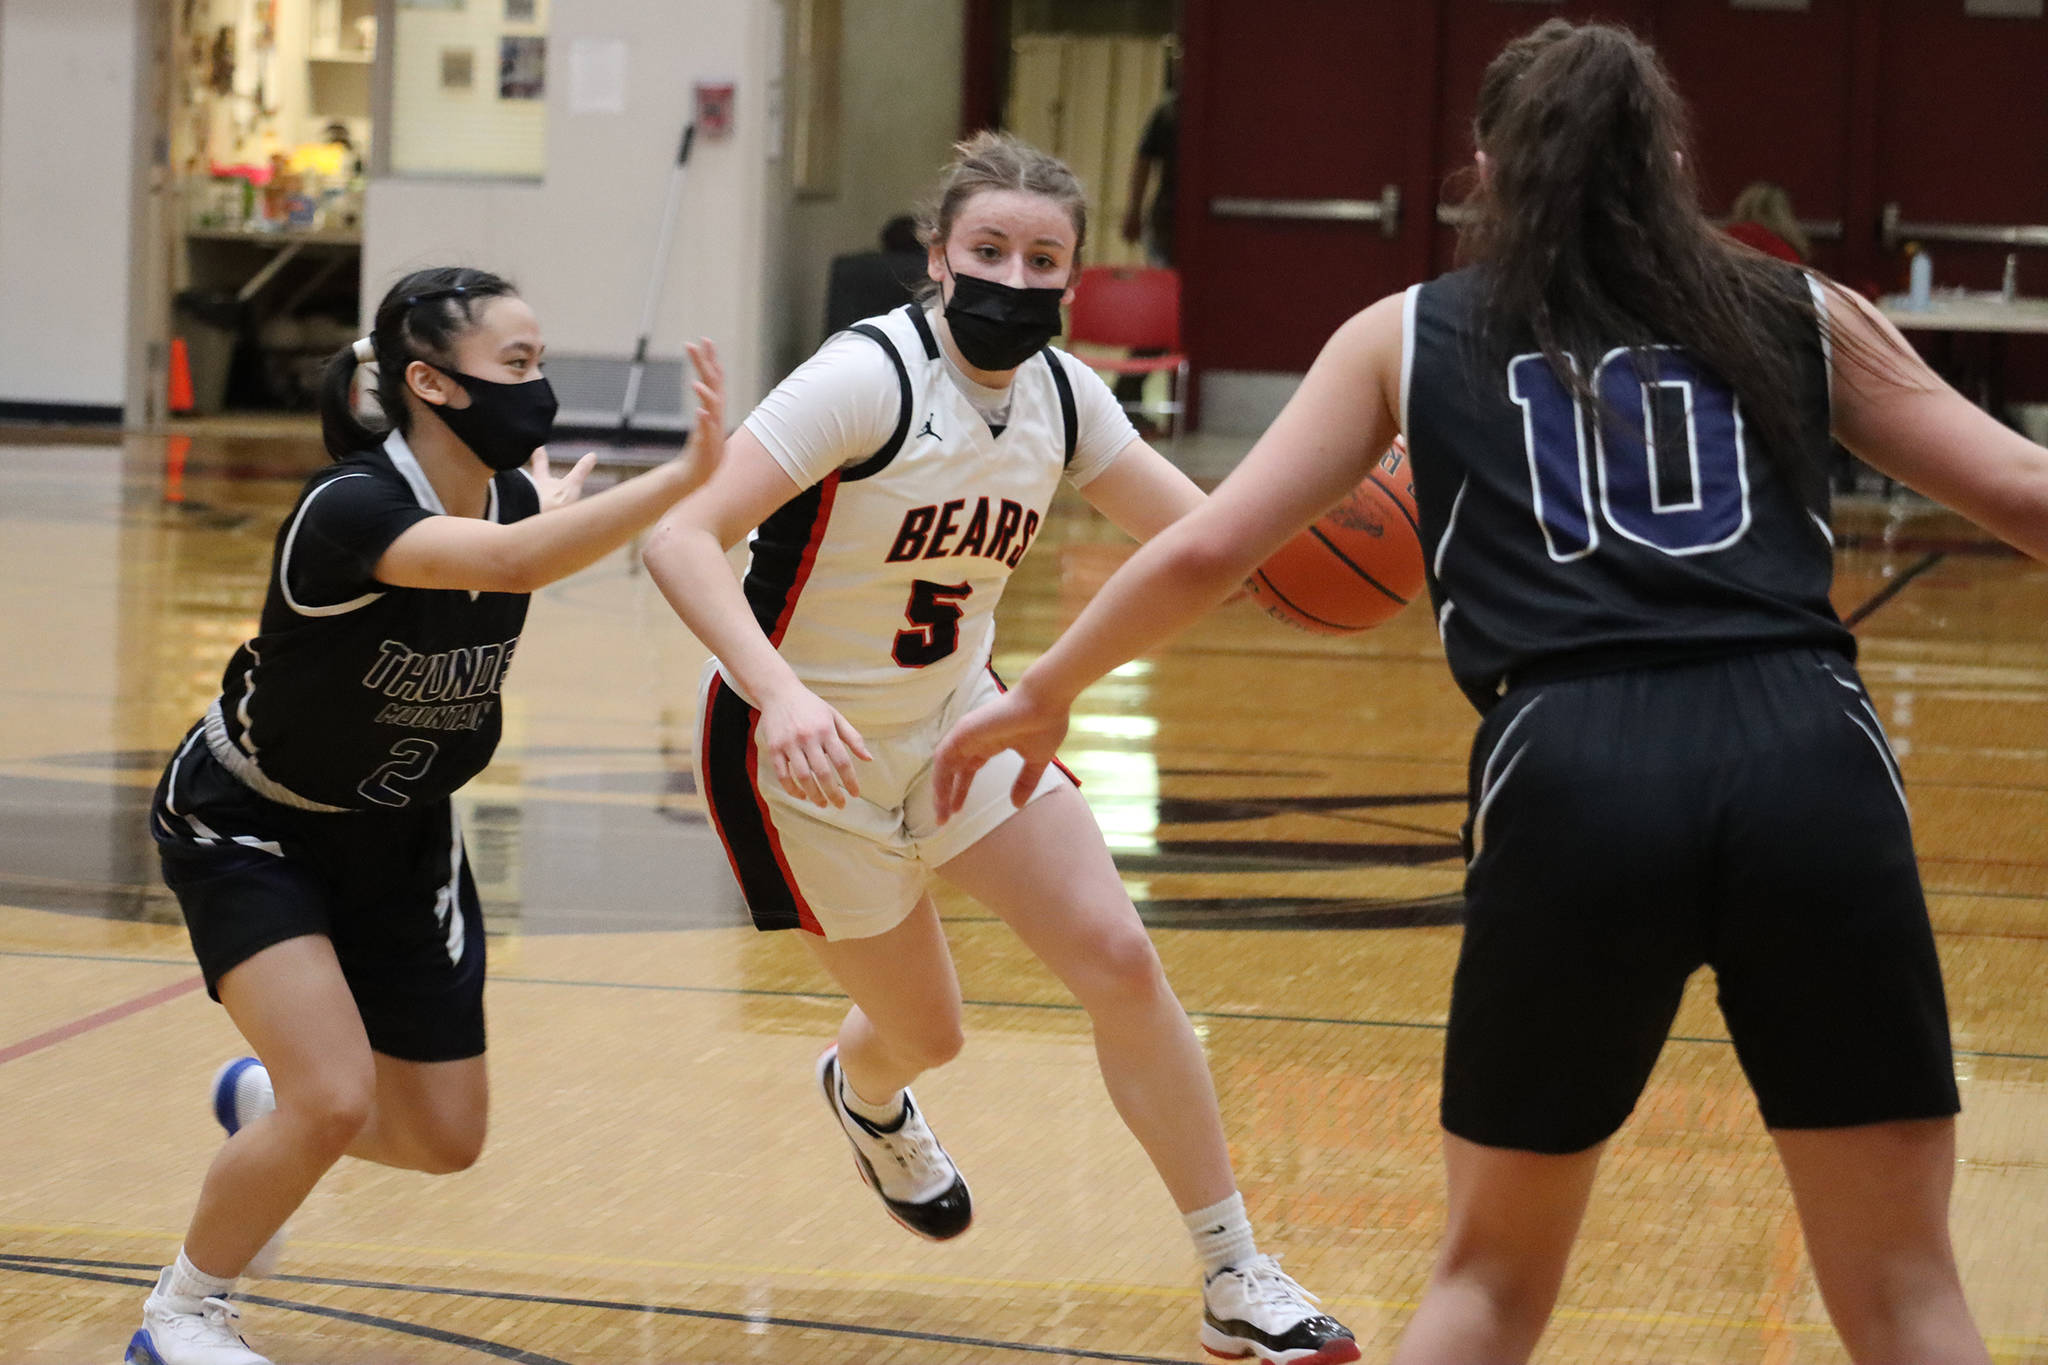 Juneau-Douglas High School: Yadaa.at Kalé’s Kiana Potter (5) drives toward the hoop while being defended by Thunder Mountain High School’s Mary Khaye Garcia (2) and Riley Traxler (10). Potter finished the game with 15 points and 16 rebounds. (Ben Hohenstatt / Juneau Empire)